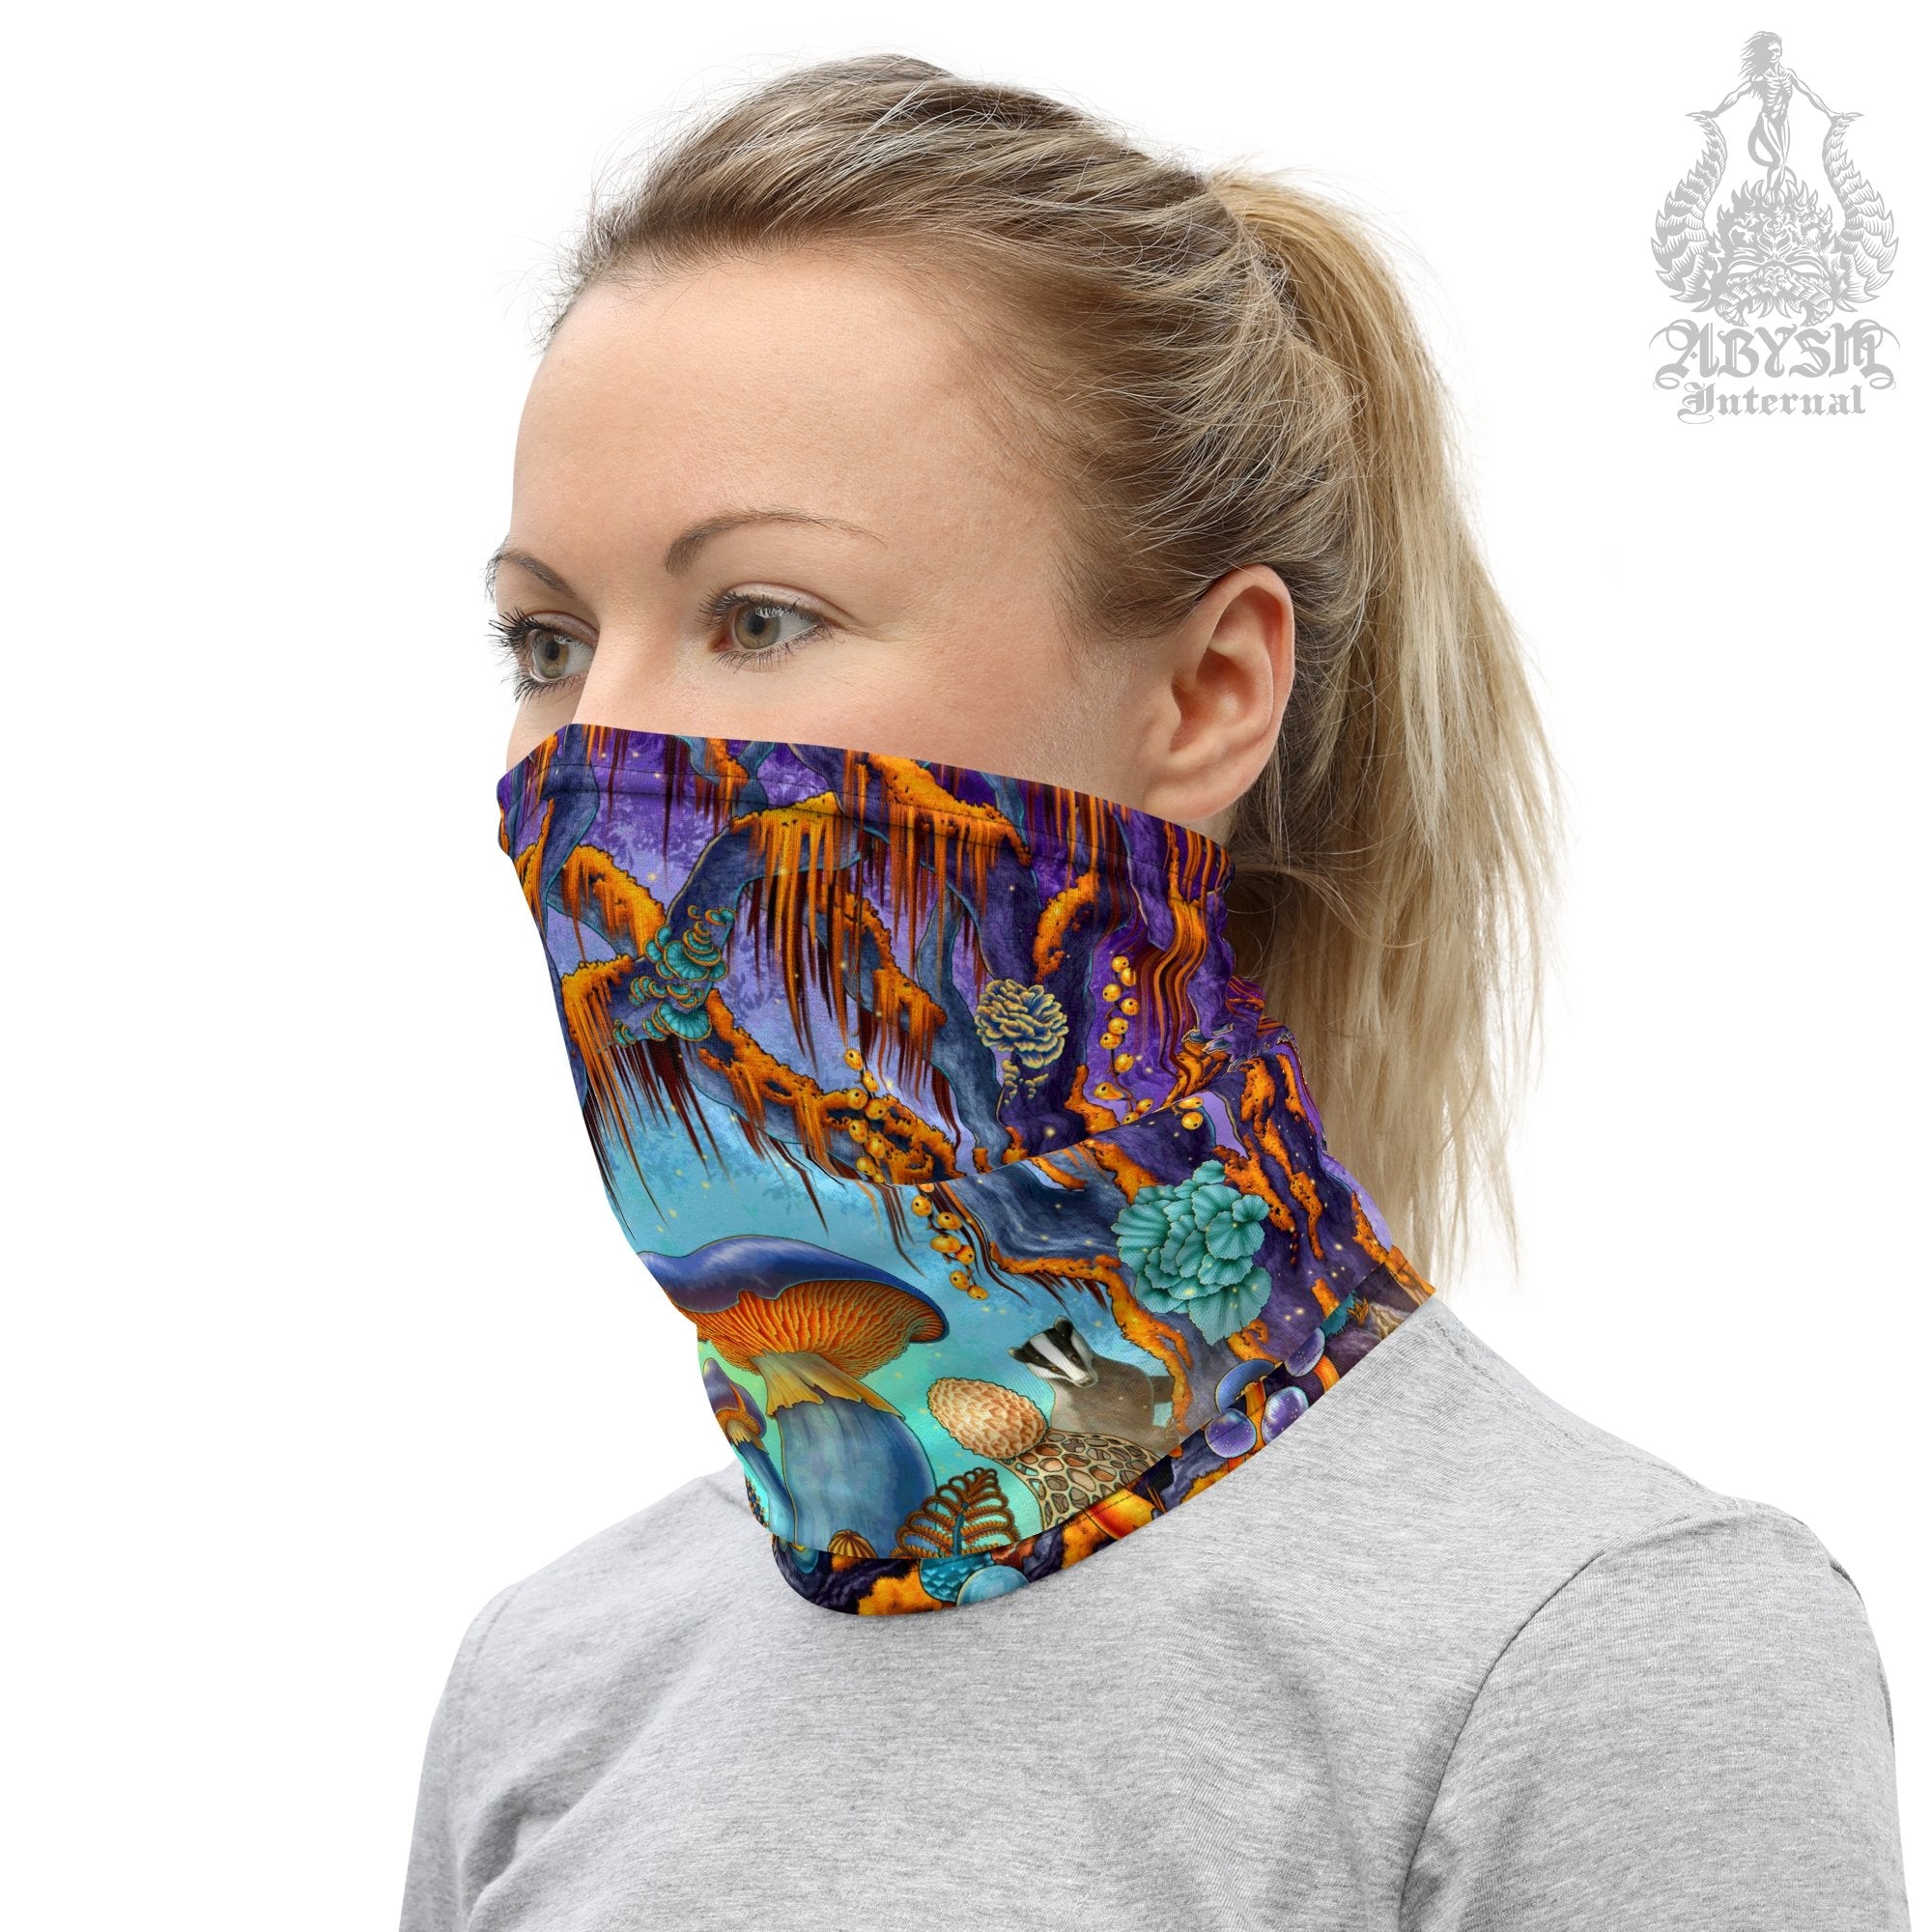 Mushrooms Neck Gaiter, Face Mask, Head Covering, Magic Shrooms Art, Indie Festival Outfit, Mycologyst Gift - Cyan and Gold - Abysm Internal